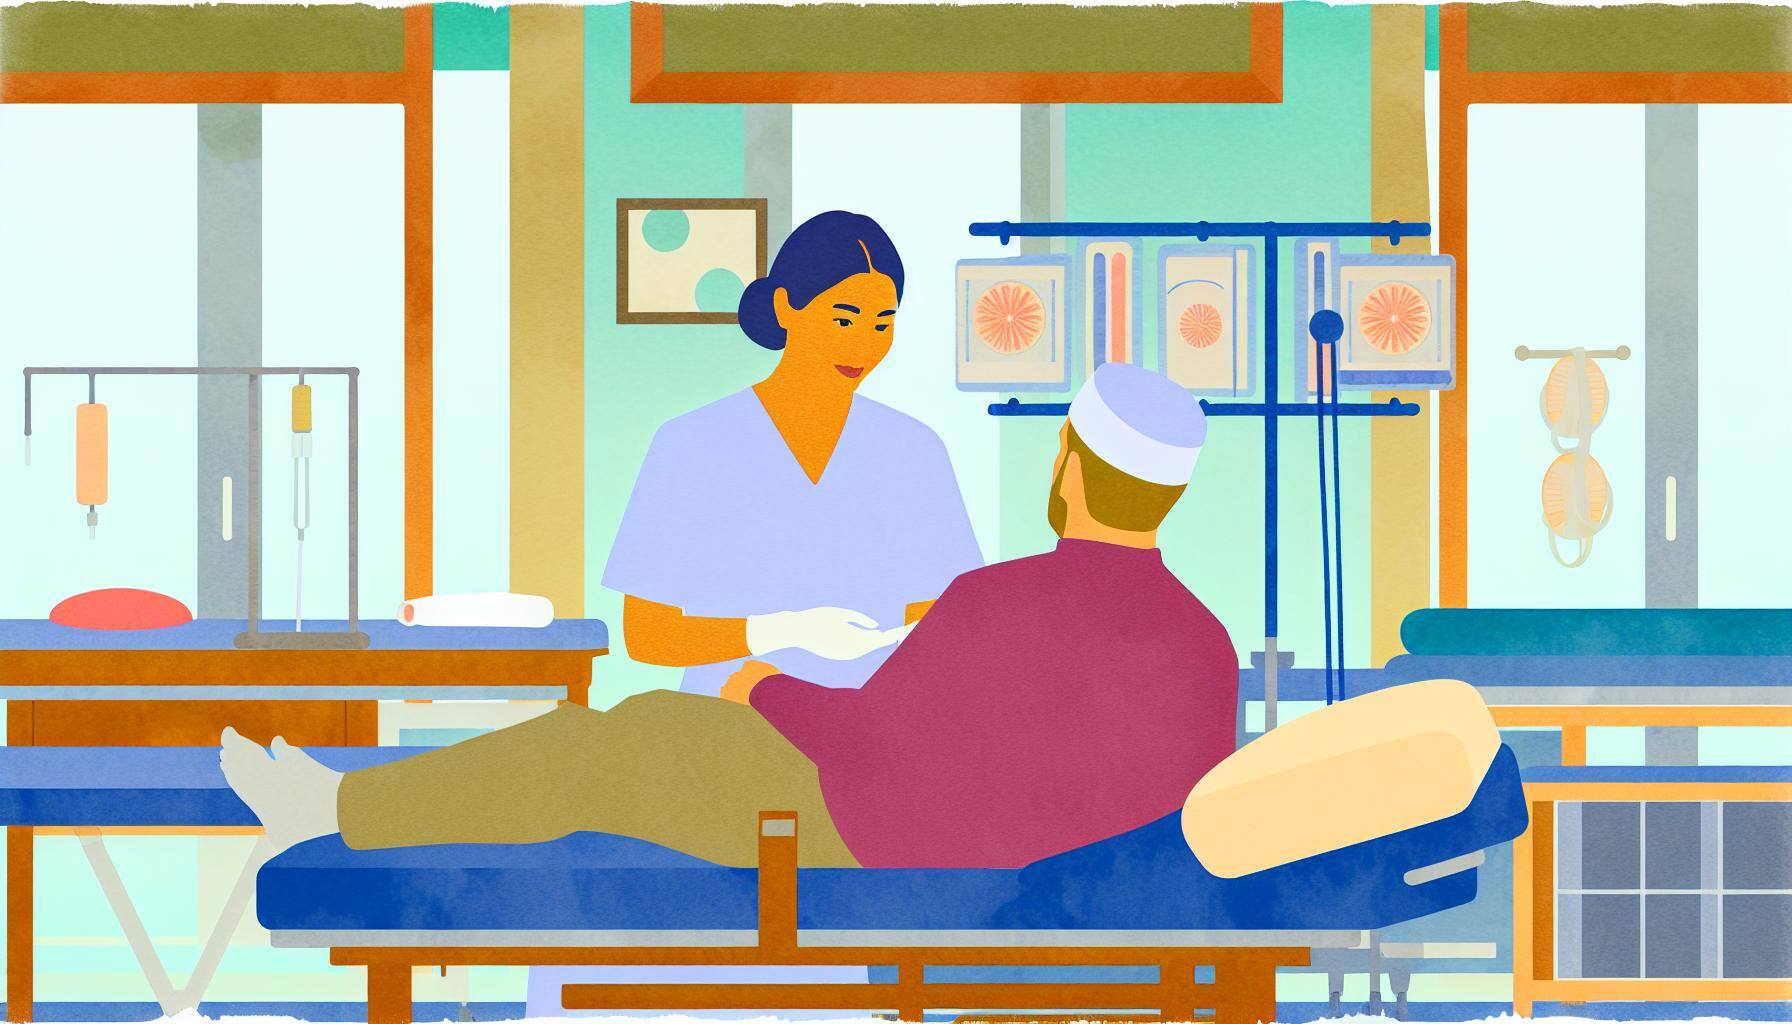 A person receiving physiotherapy treatment